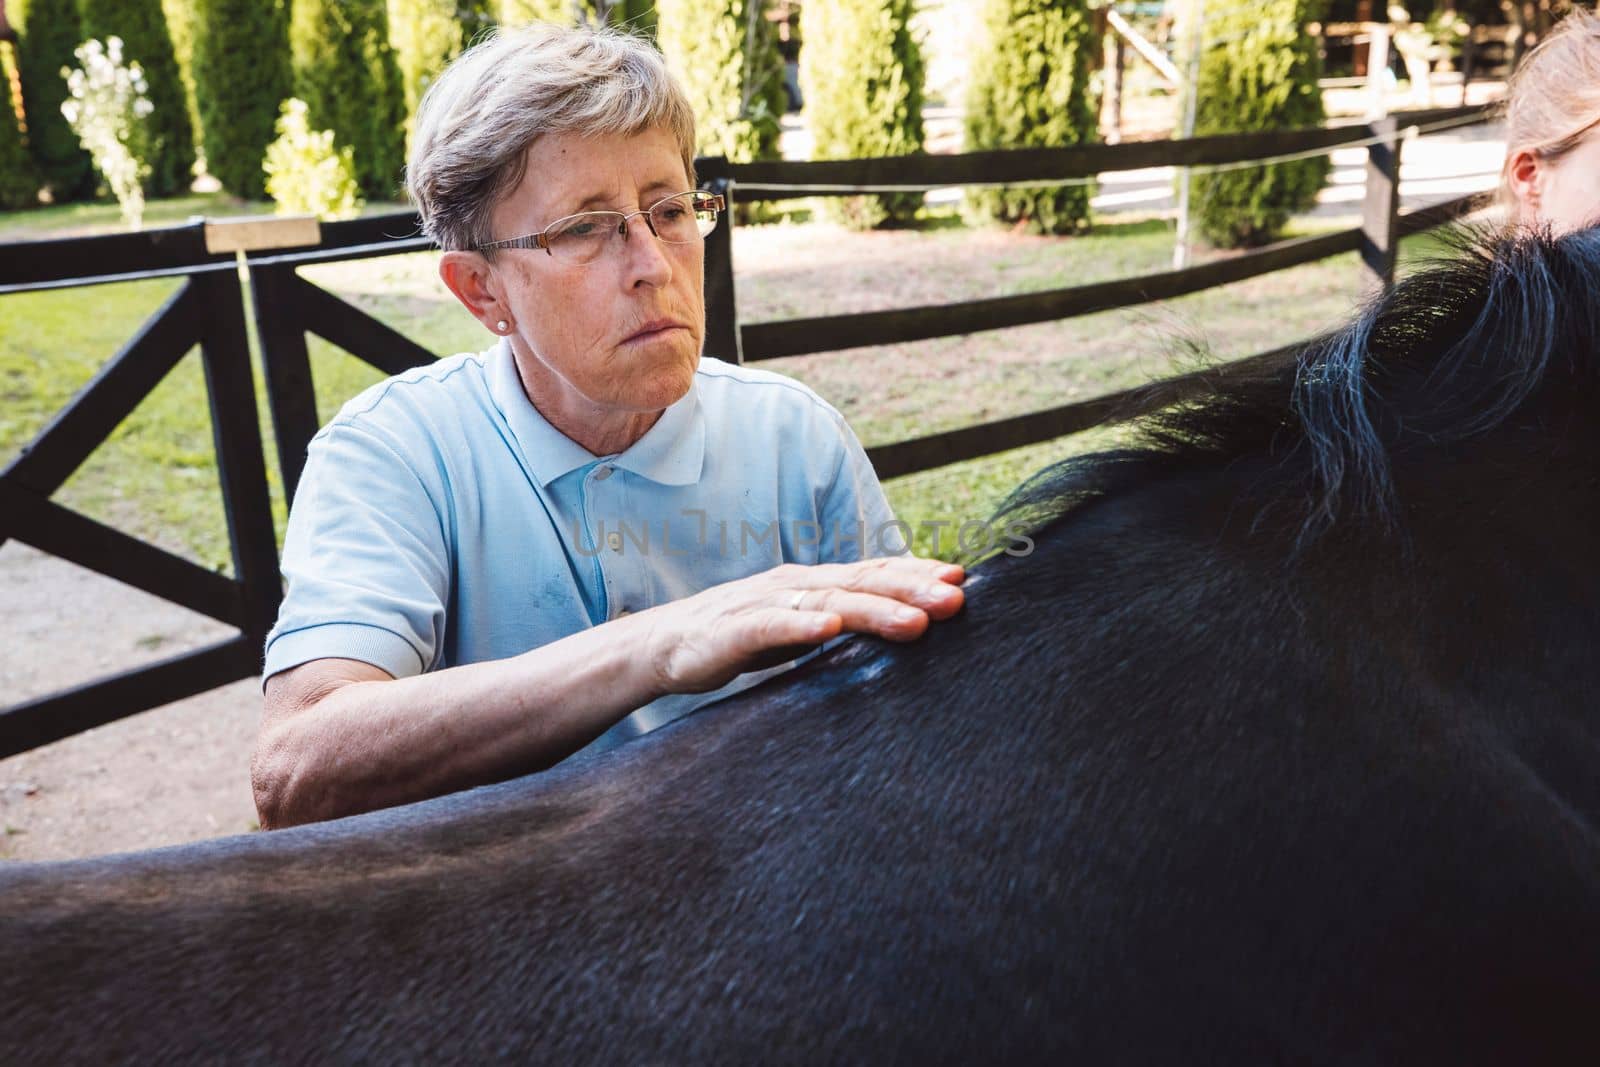 Senior woman grooming a black horse, petting him on the back.